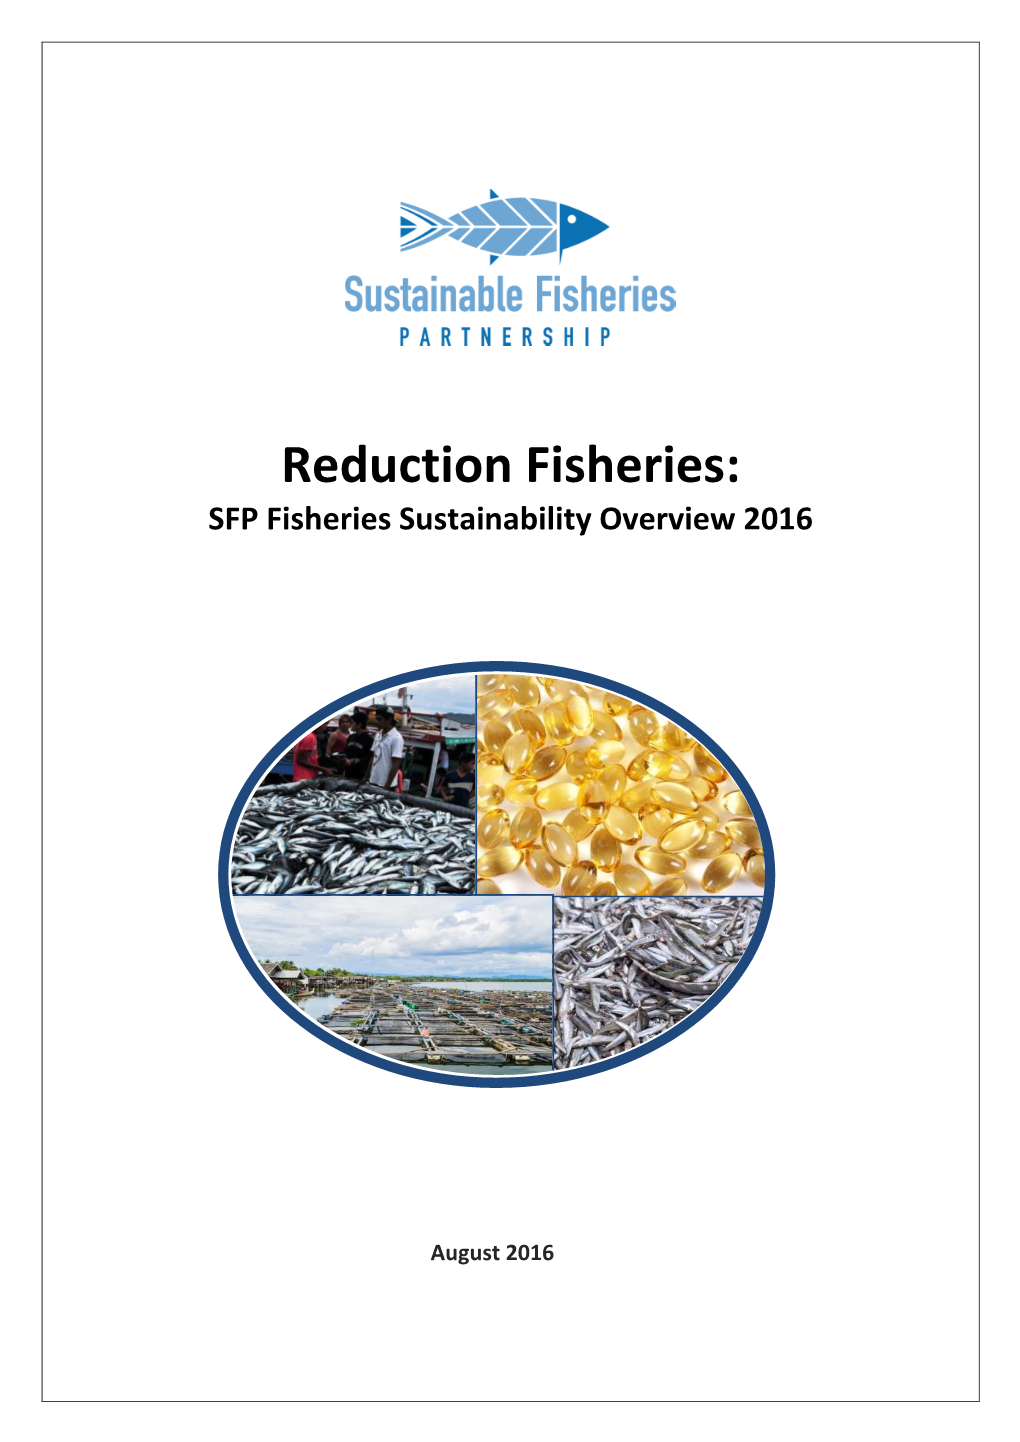 Reduction Fisheries: SFP Fisheries Sustainability Overview 2016